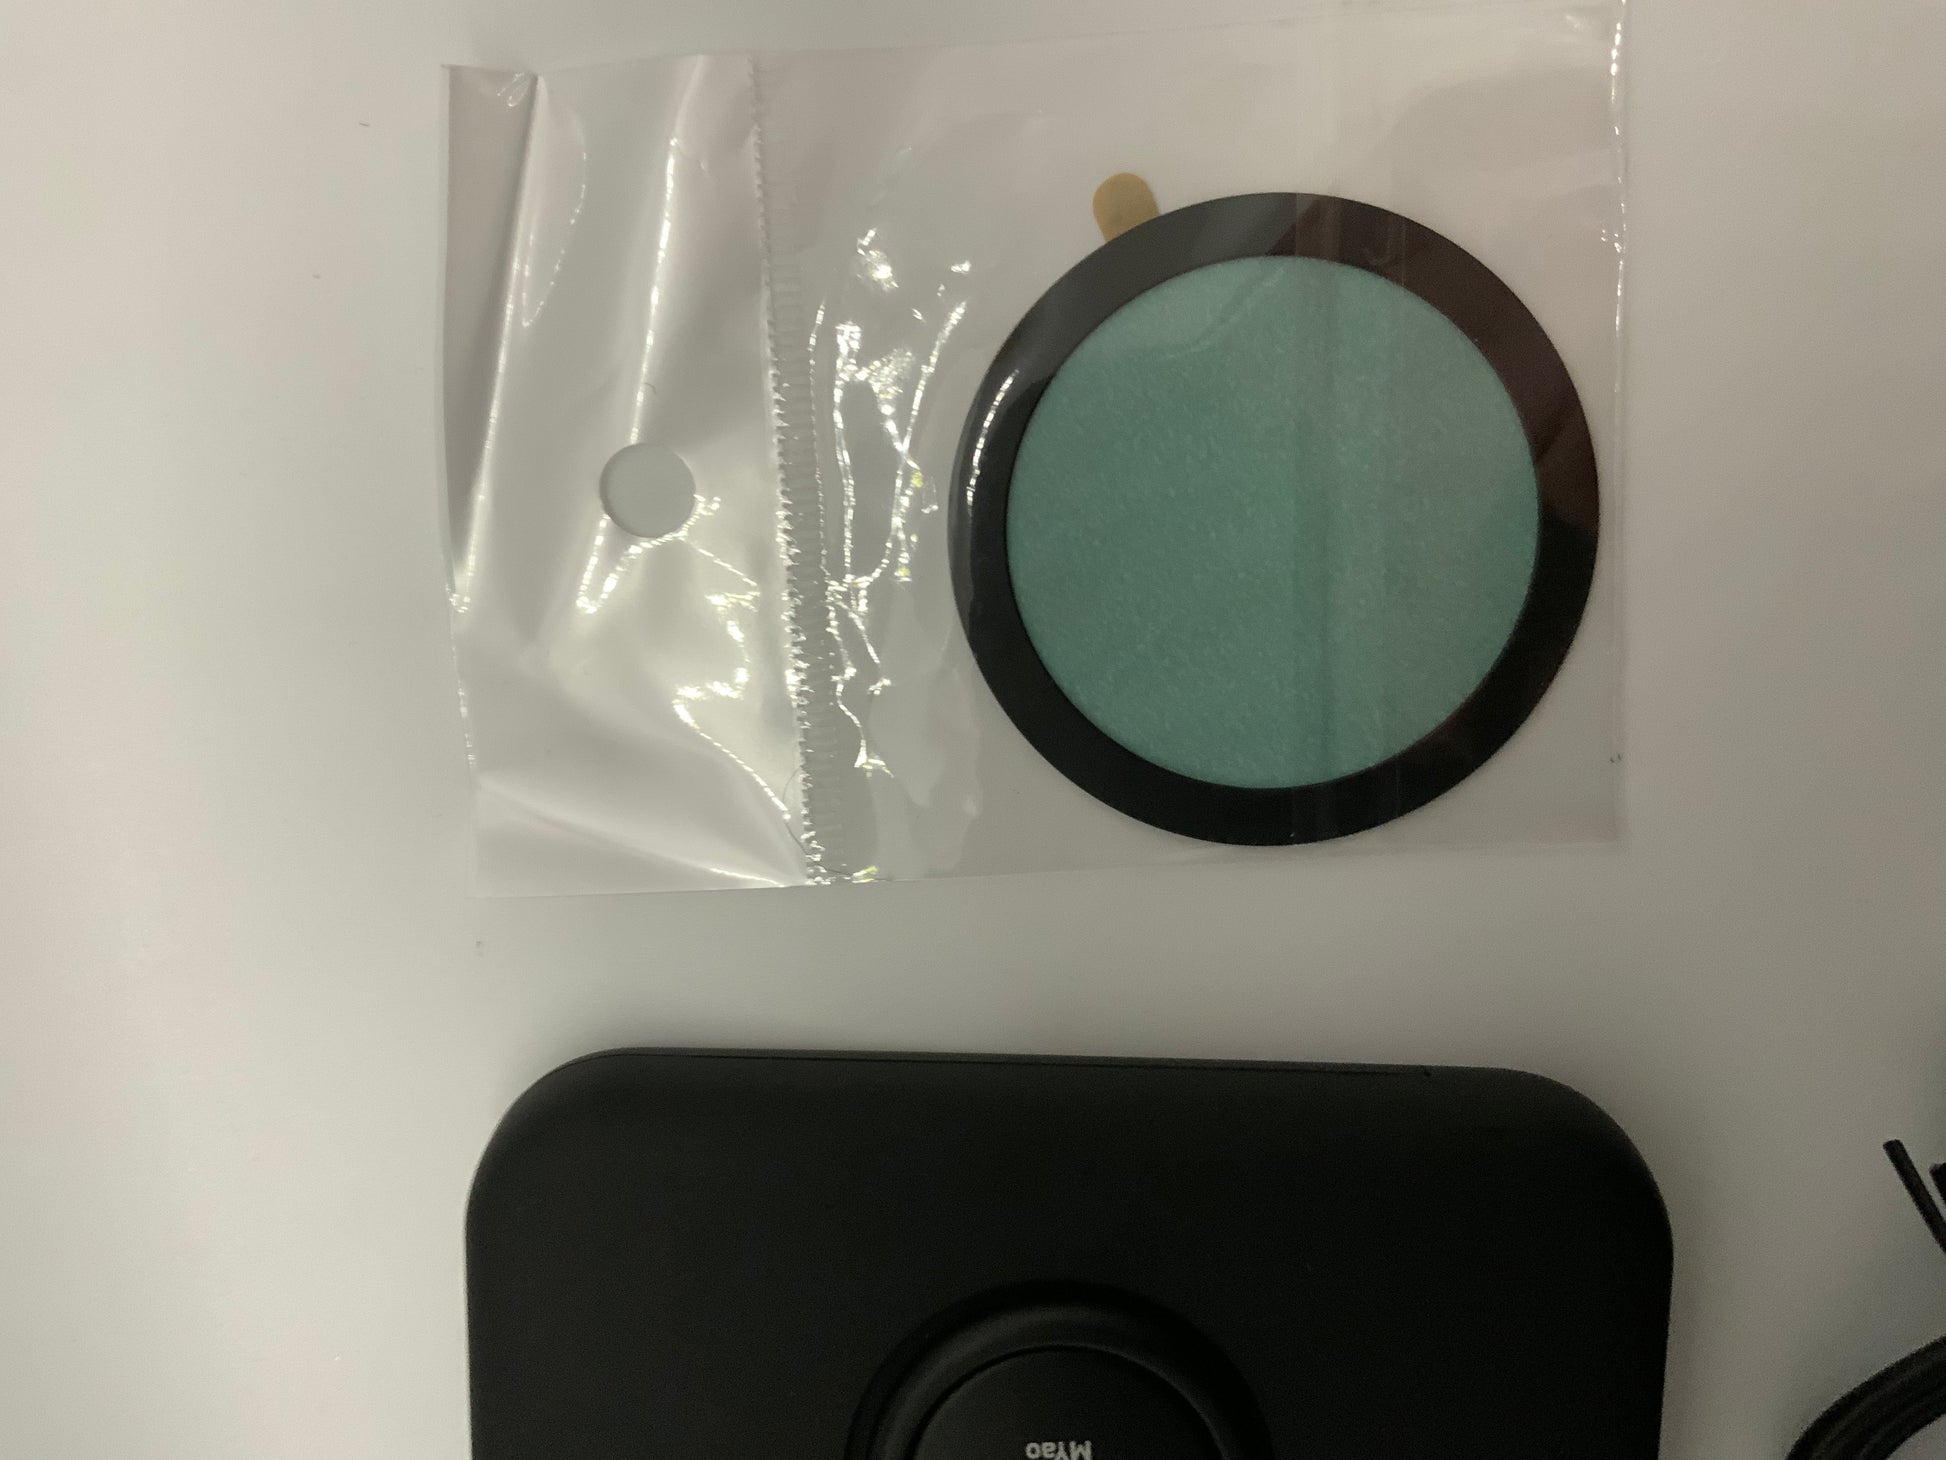 The picture shows three items on a white surface. 1. On the top left, there is a clear plastic bag with a white circular sticker sealing it. The bag is empty and has a glossy finish.2. To the right of the plastic bag, there is a circular object with a black outer ring and a light green center. It appears to be a filter or a pad of some sort. It is also inside a clear plastic bag.3. At the bottom of the picture, there is a black rectangular object with rounded corners. It has a circular inden